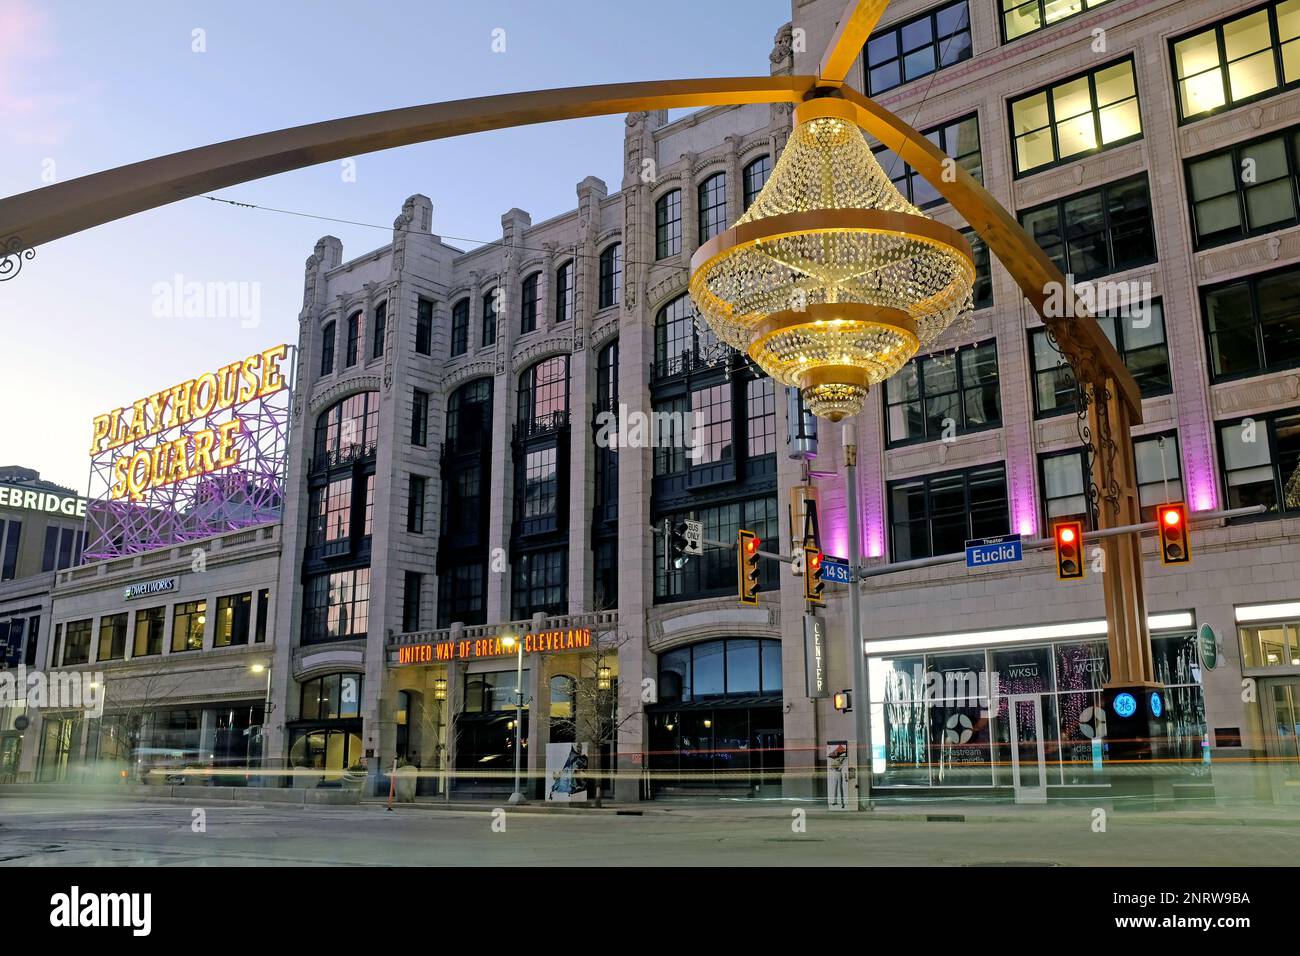 Large outdoor chandelier lights up at dusk over the main intersection of the Playhouse Square theater district in Cleveland, Ohio, USA. Stock Photo